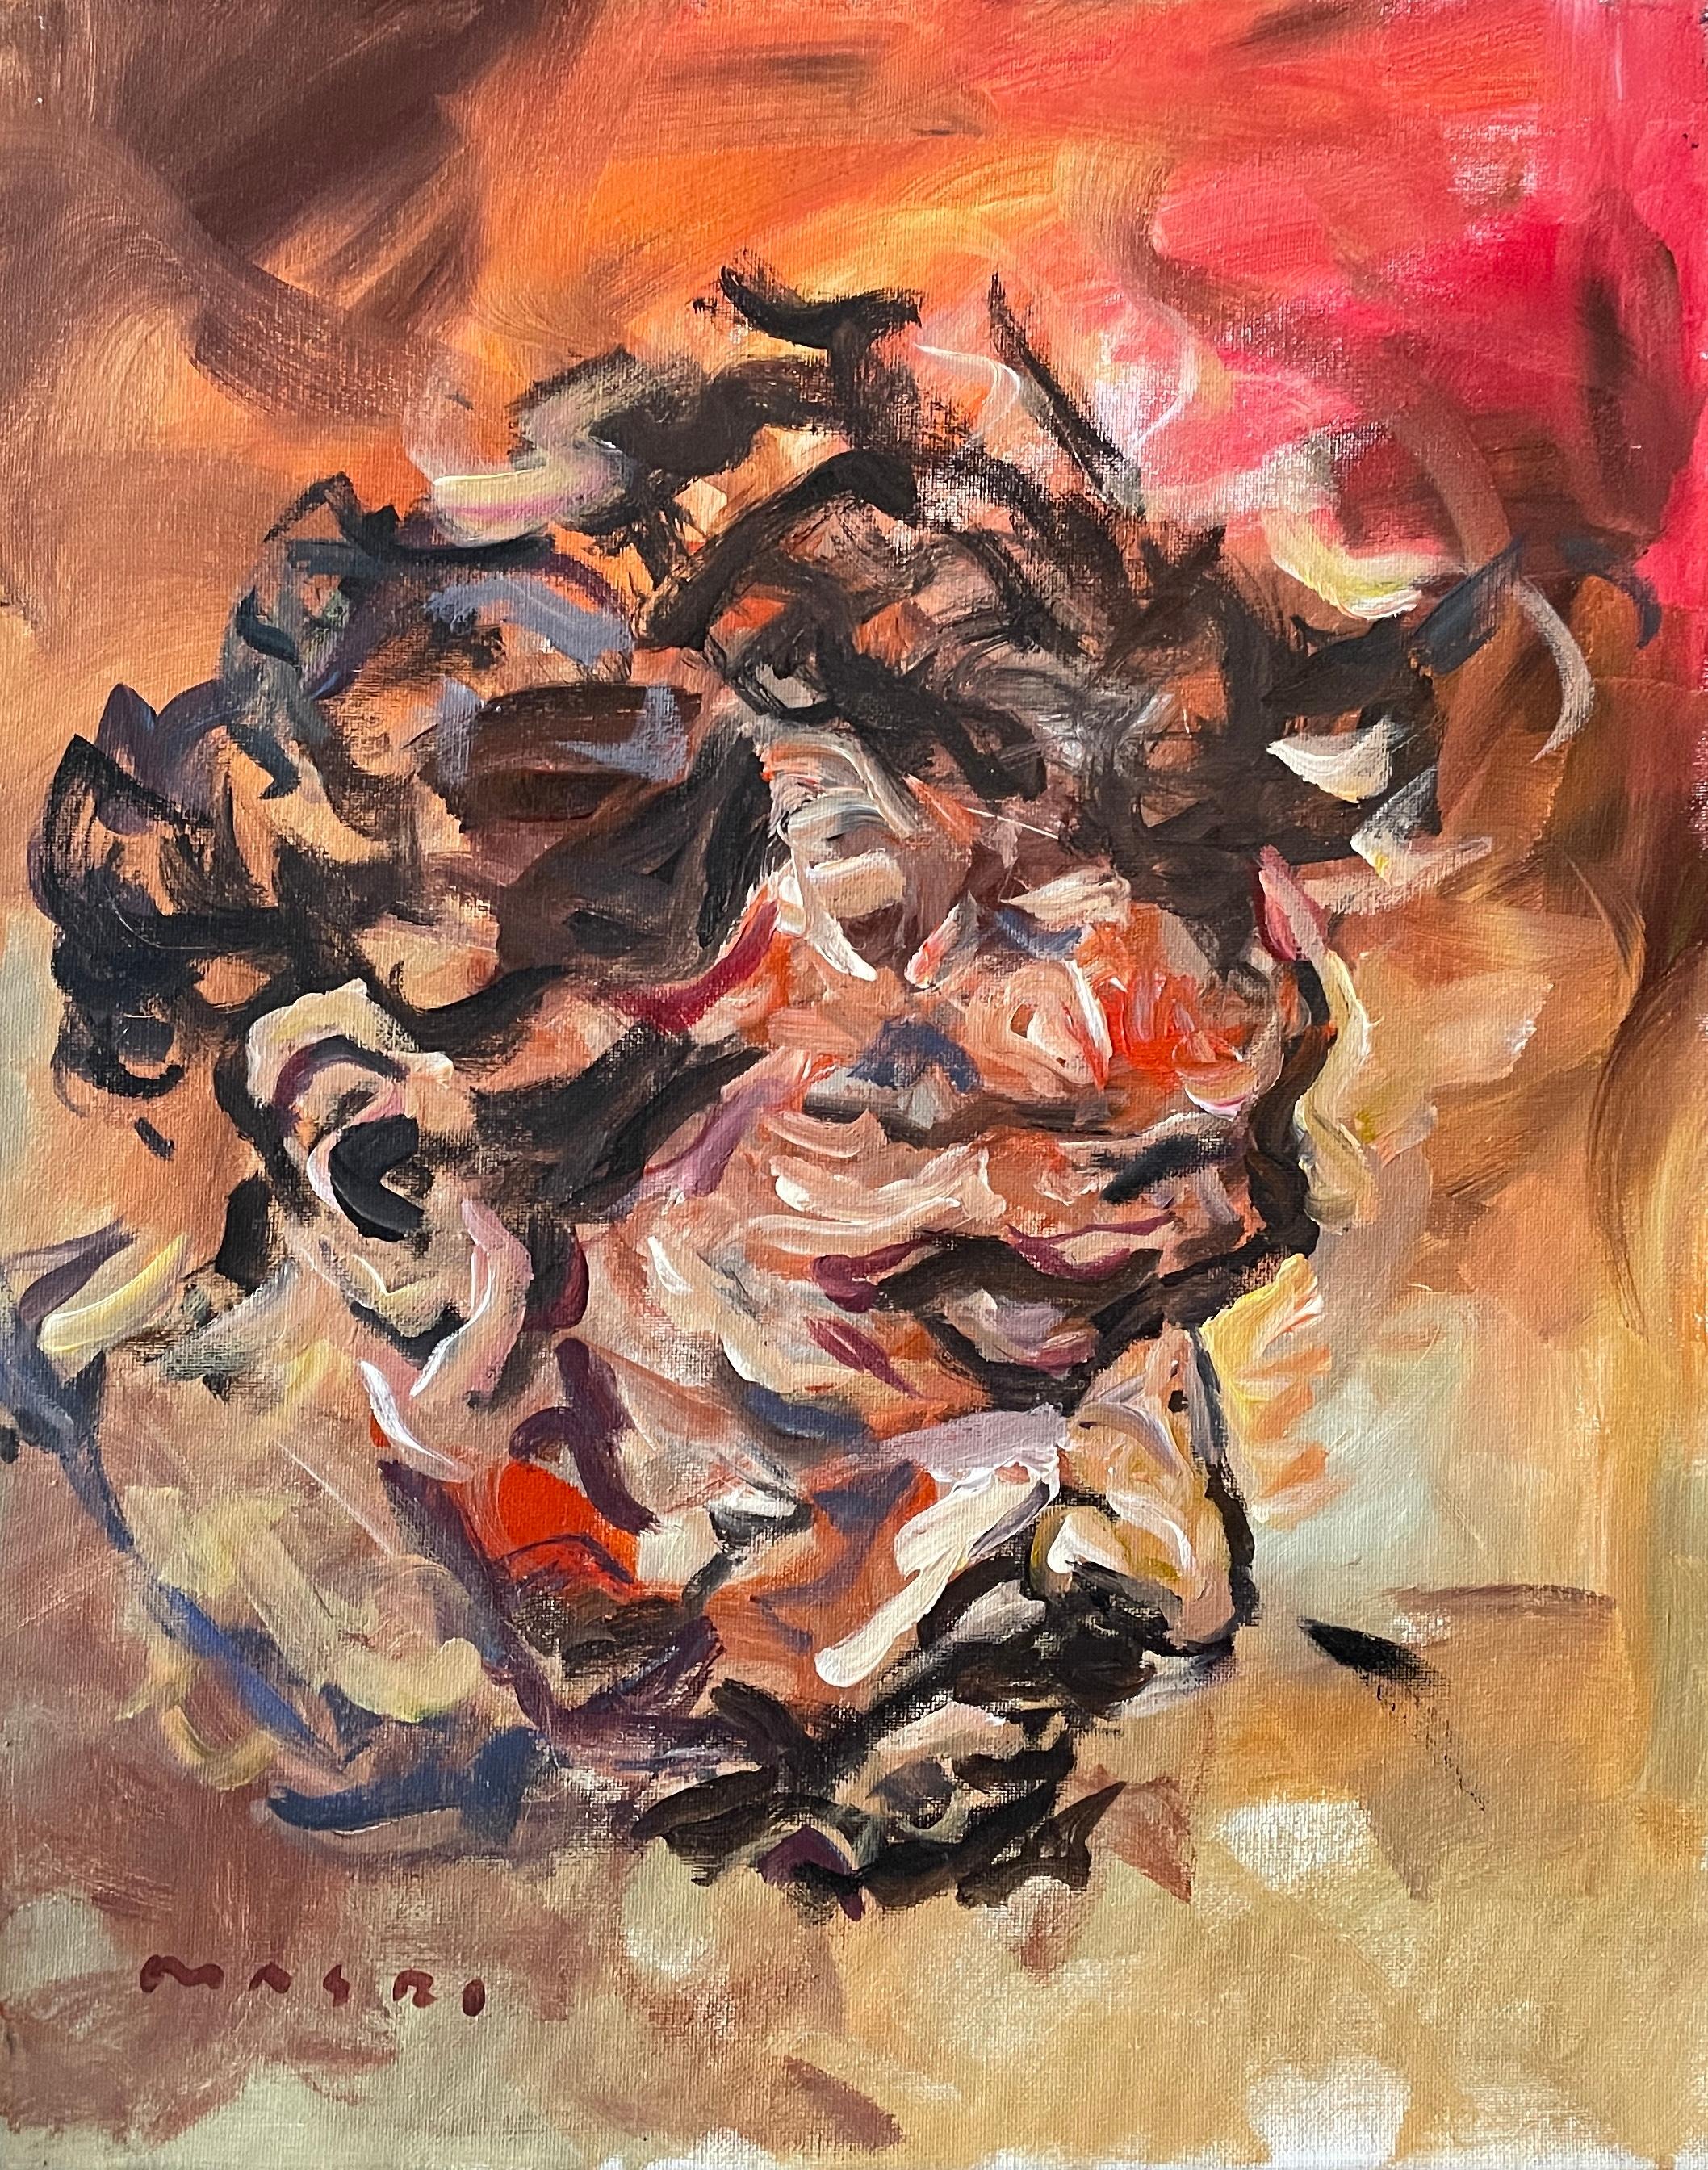 Masri Hayssam Portrait Painting - "Obsession" Mixed Media Abstract Expressionist Self Portrait by Masri